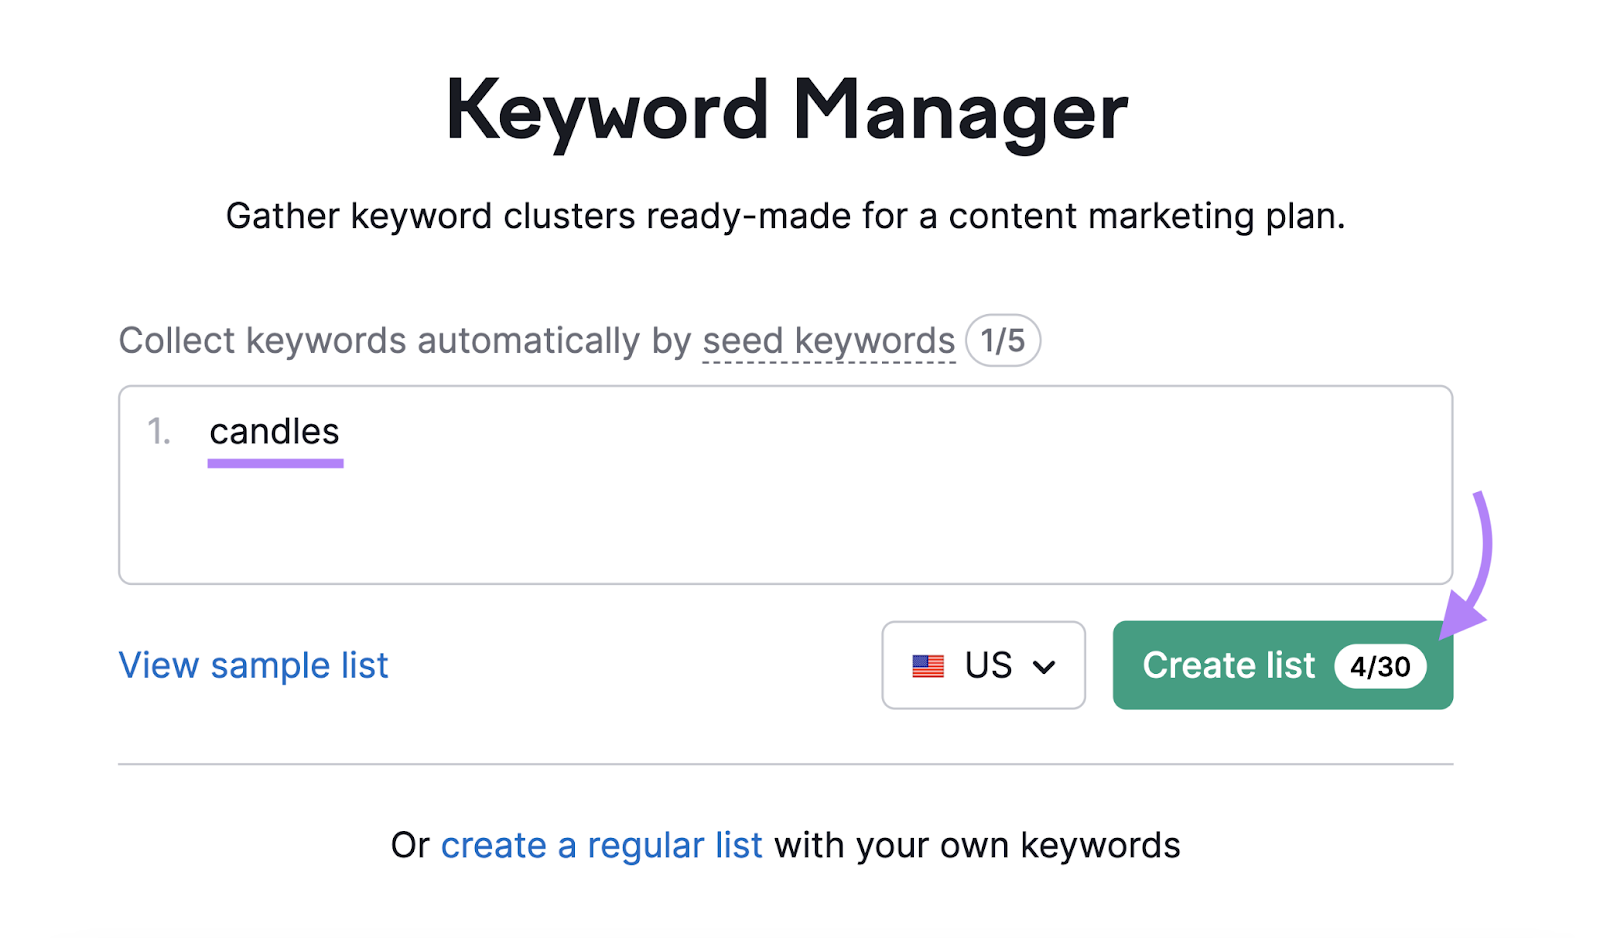 "candles" entered into the Keyword Manager tool